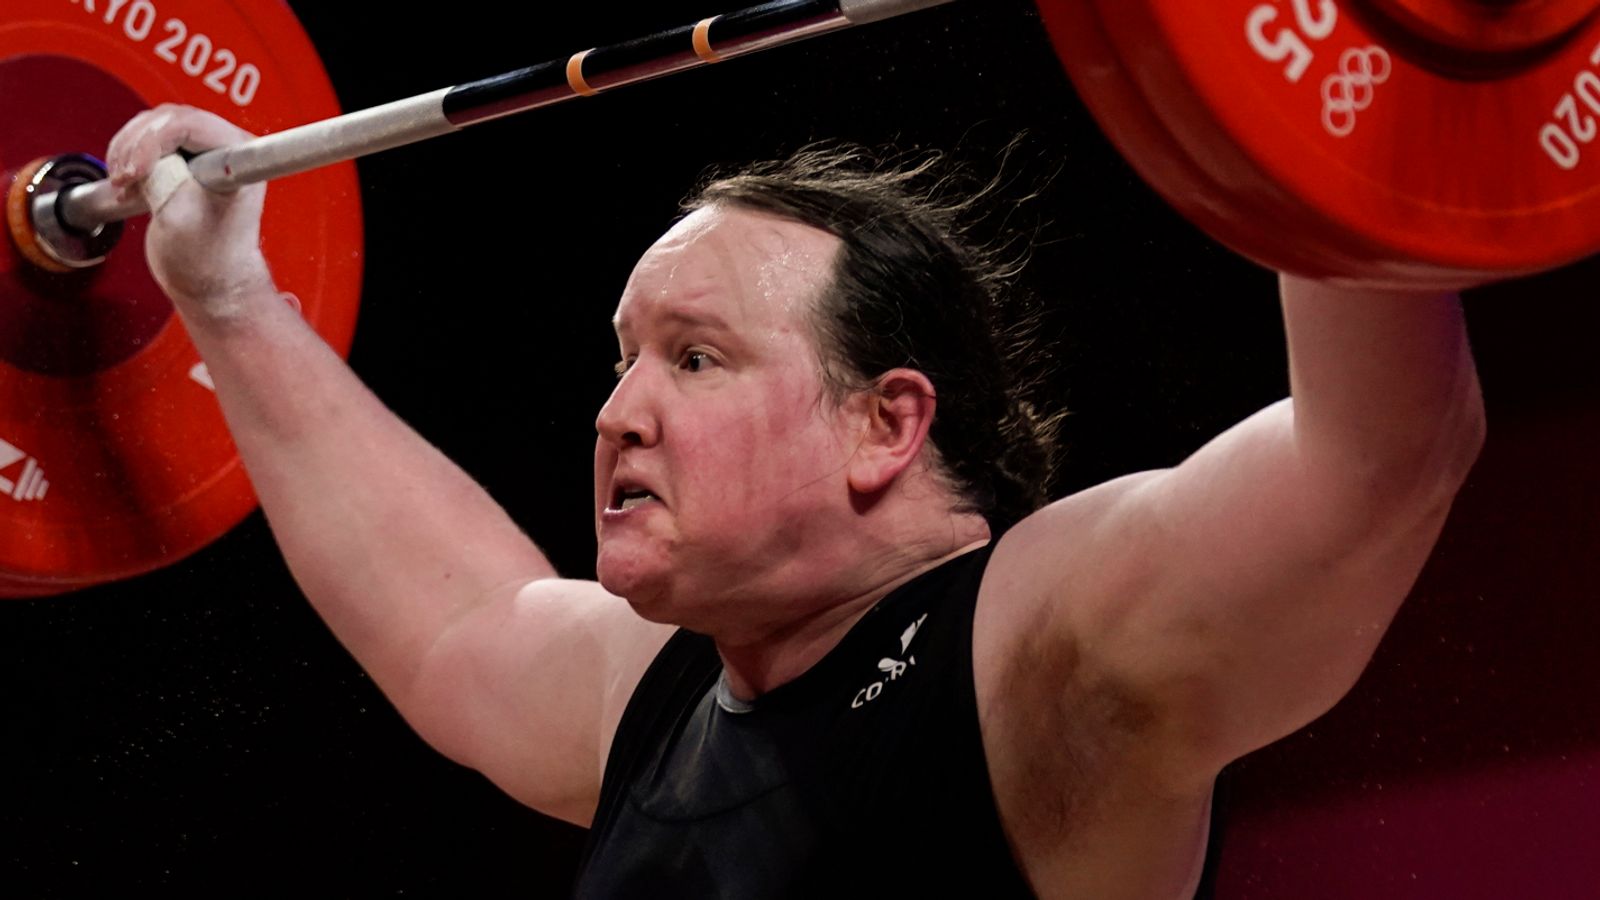 Laurel Hubbard Transgender weightlifter out of Olympic final after